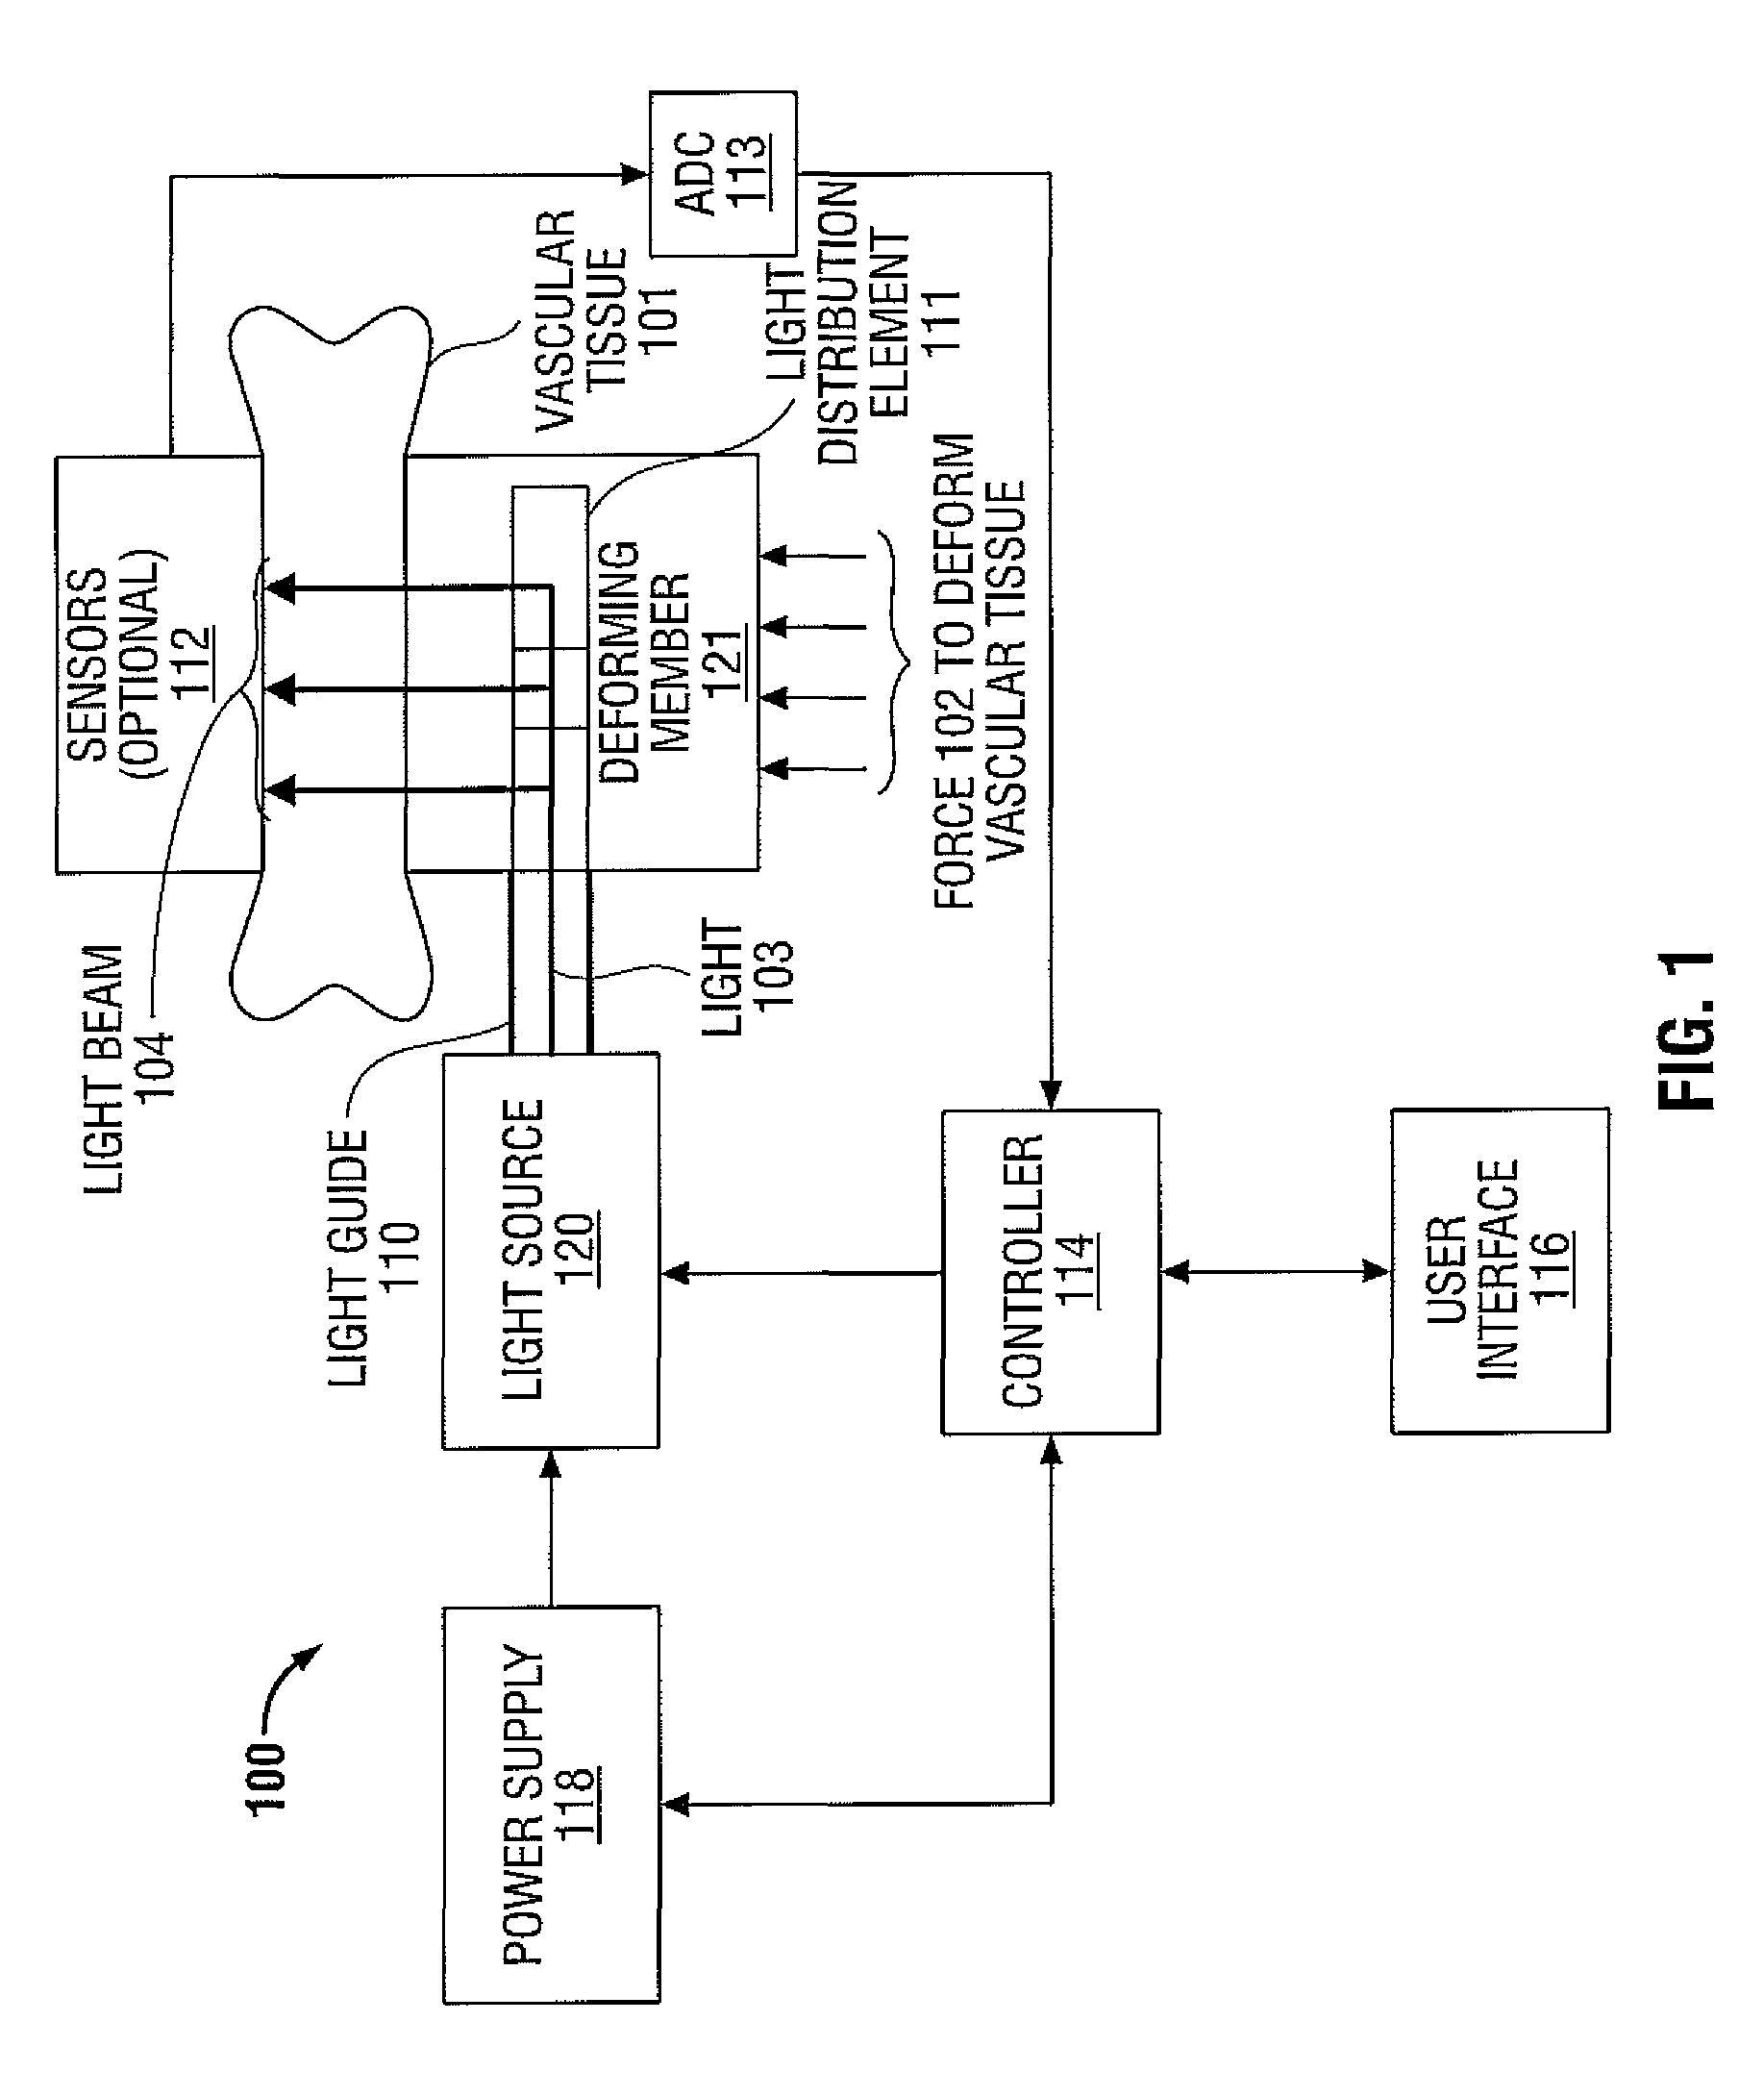 Optical energy-based methods and apparatus for tissue sealing